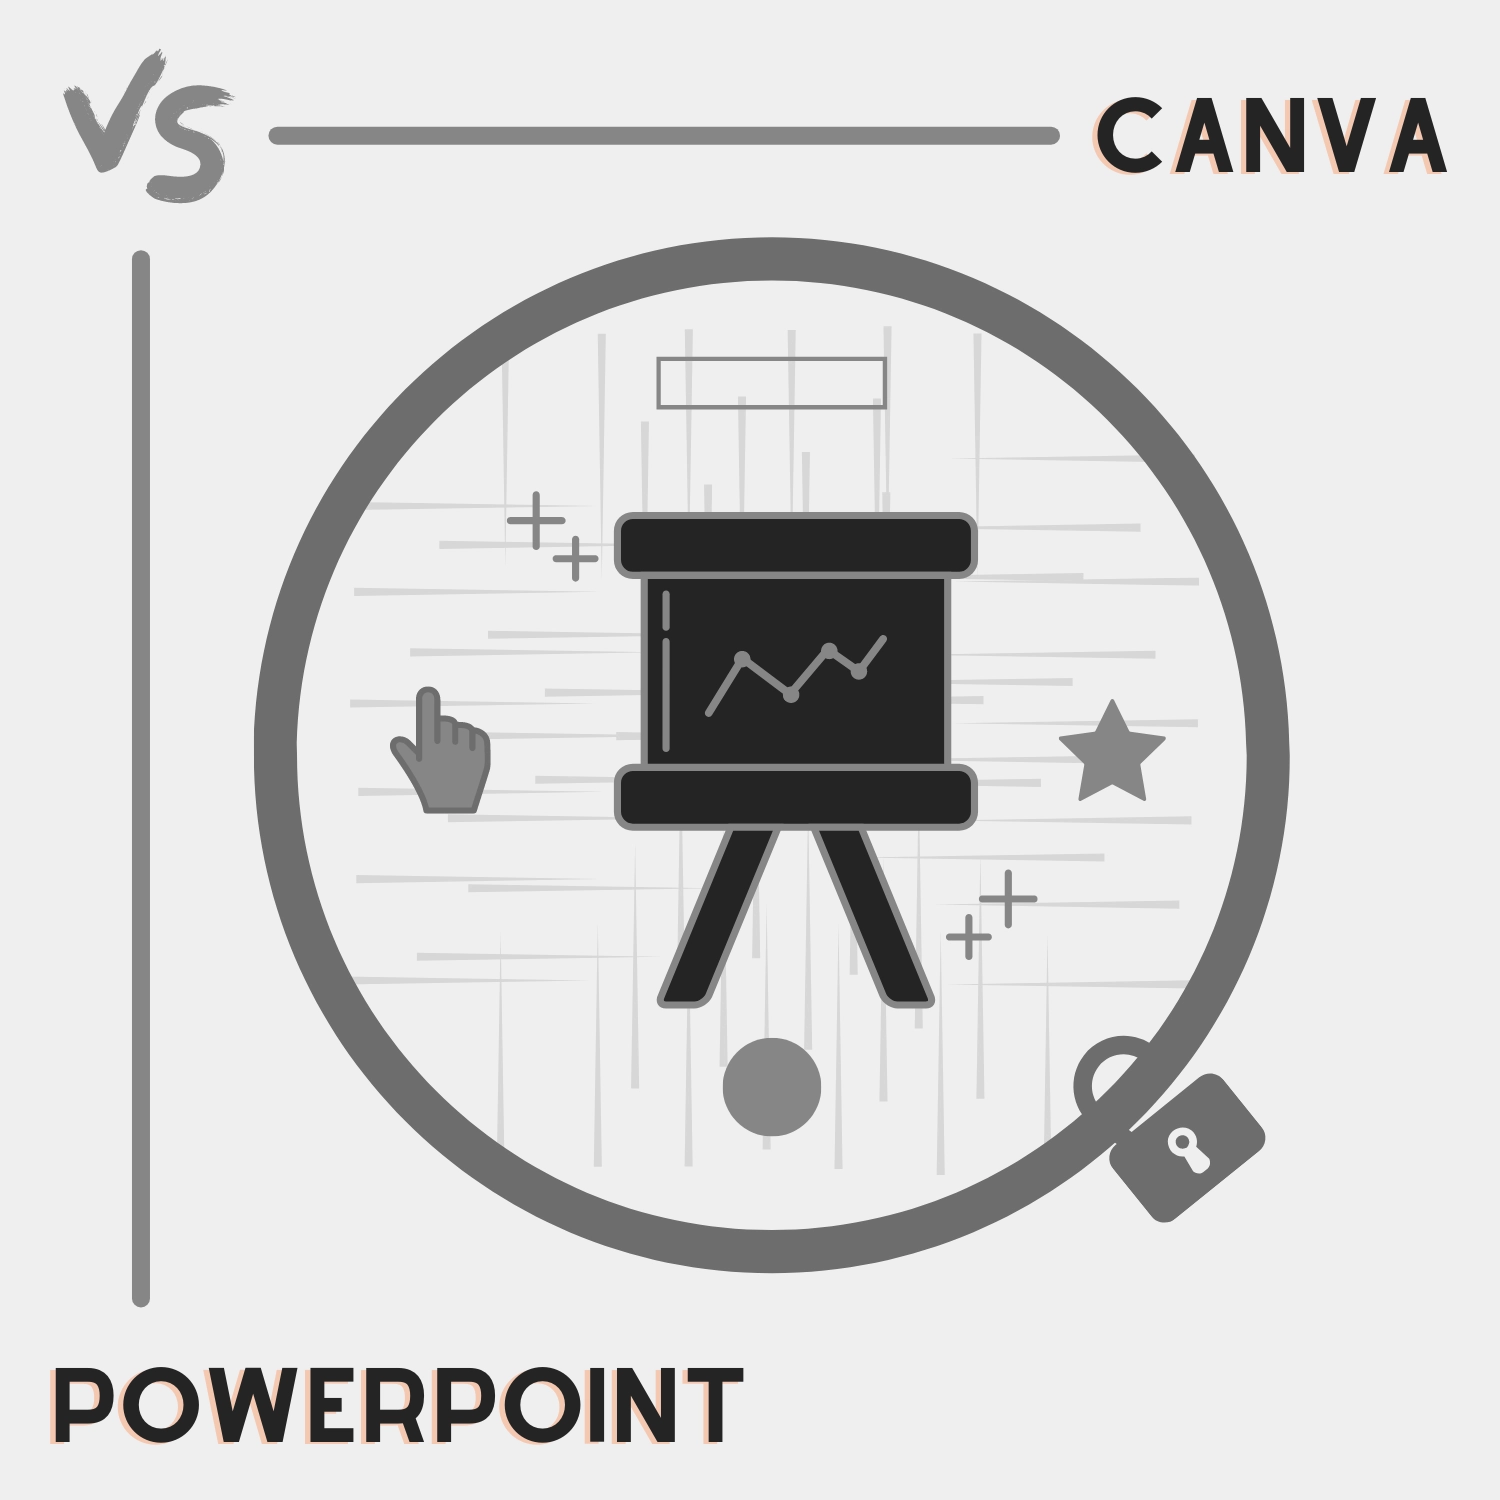 Canva frente a PowerPoint